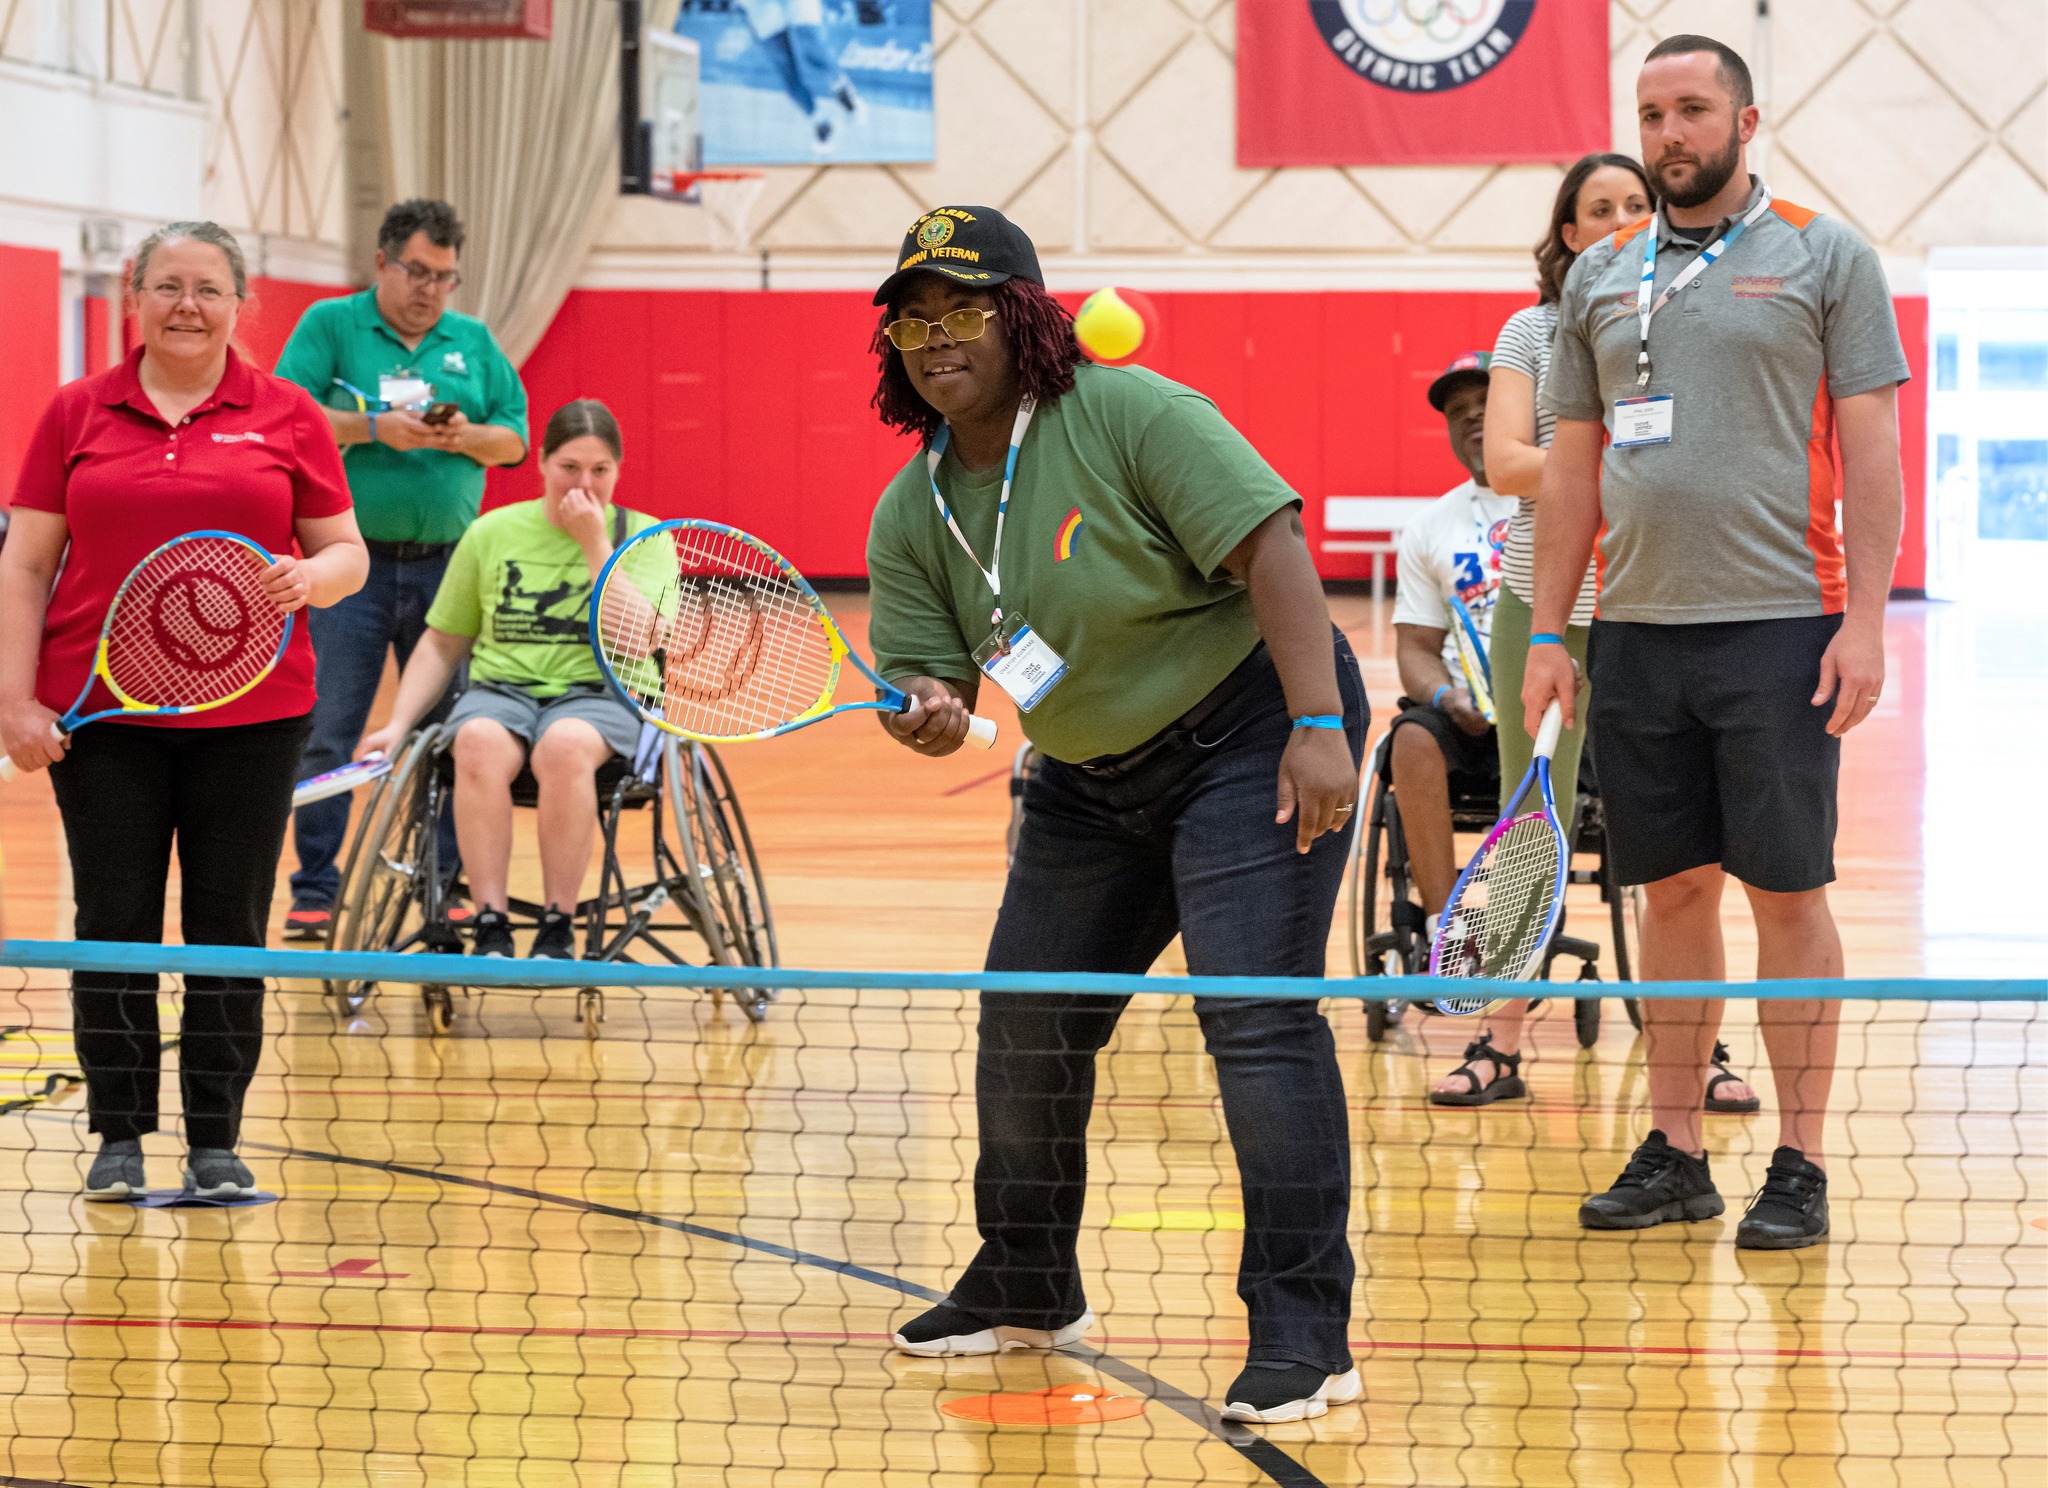 Adaptive athlete learning to play pickleball